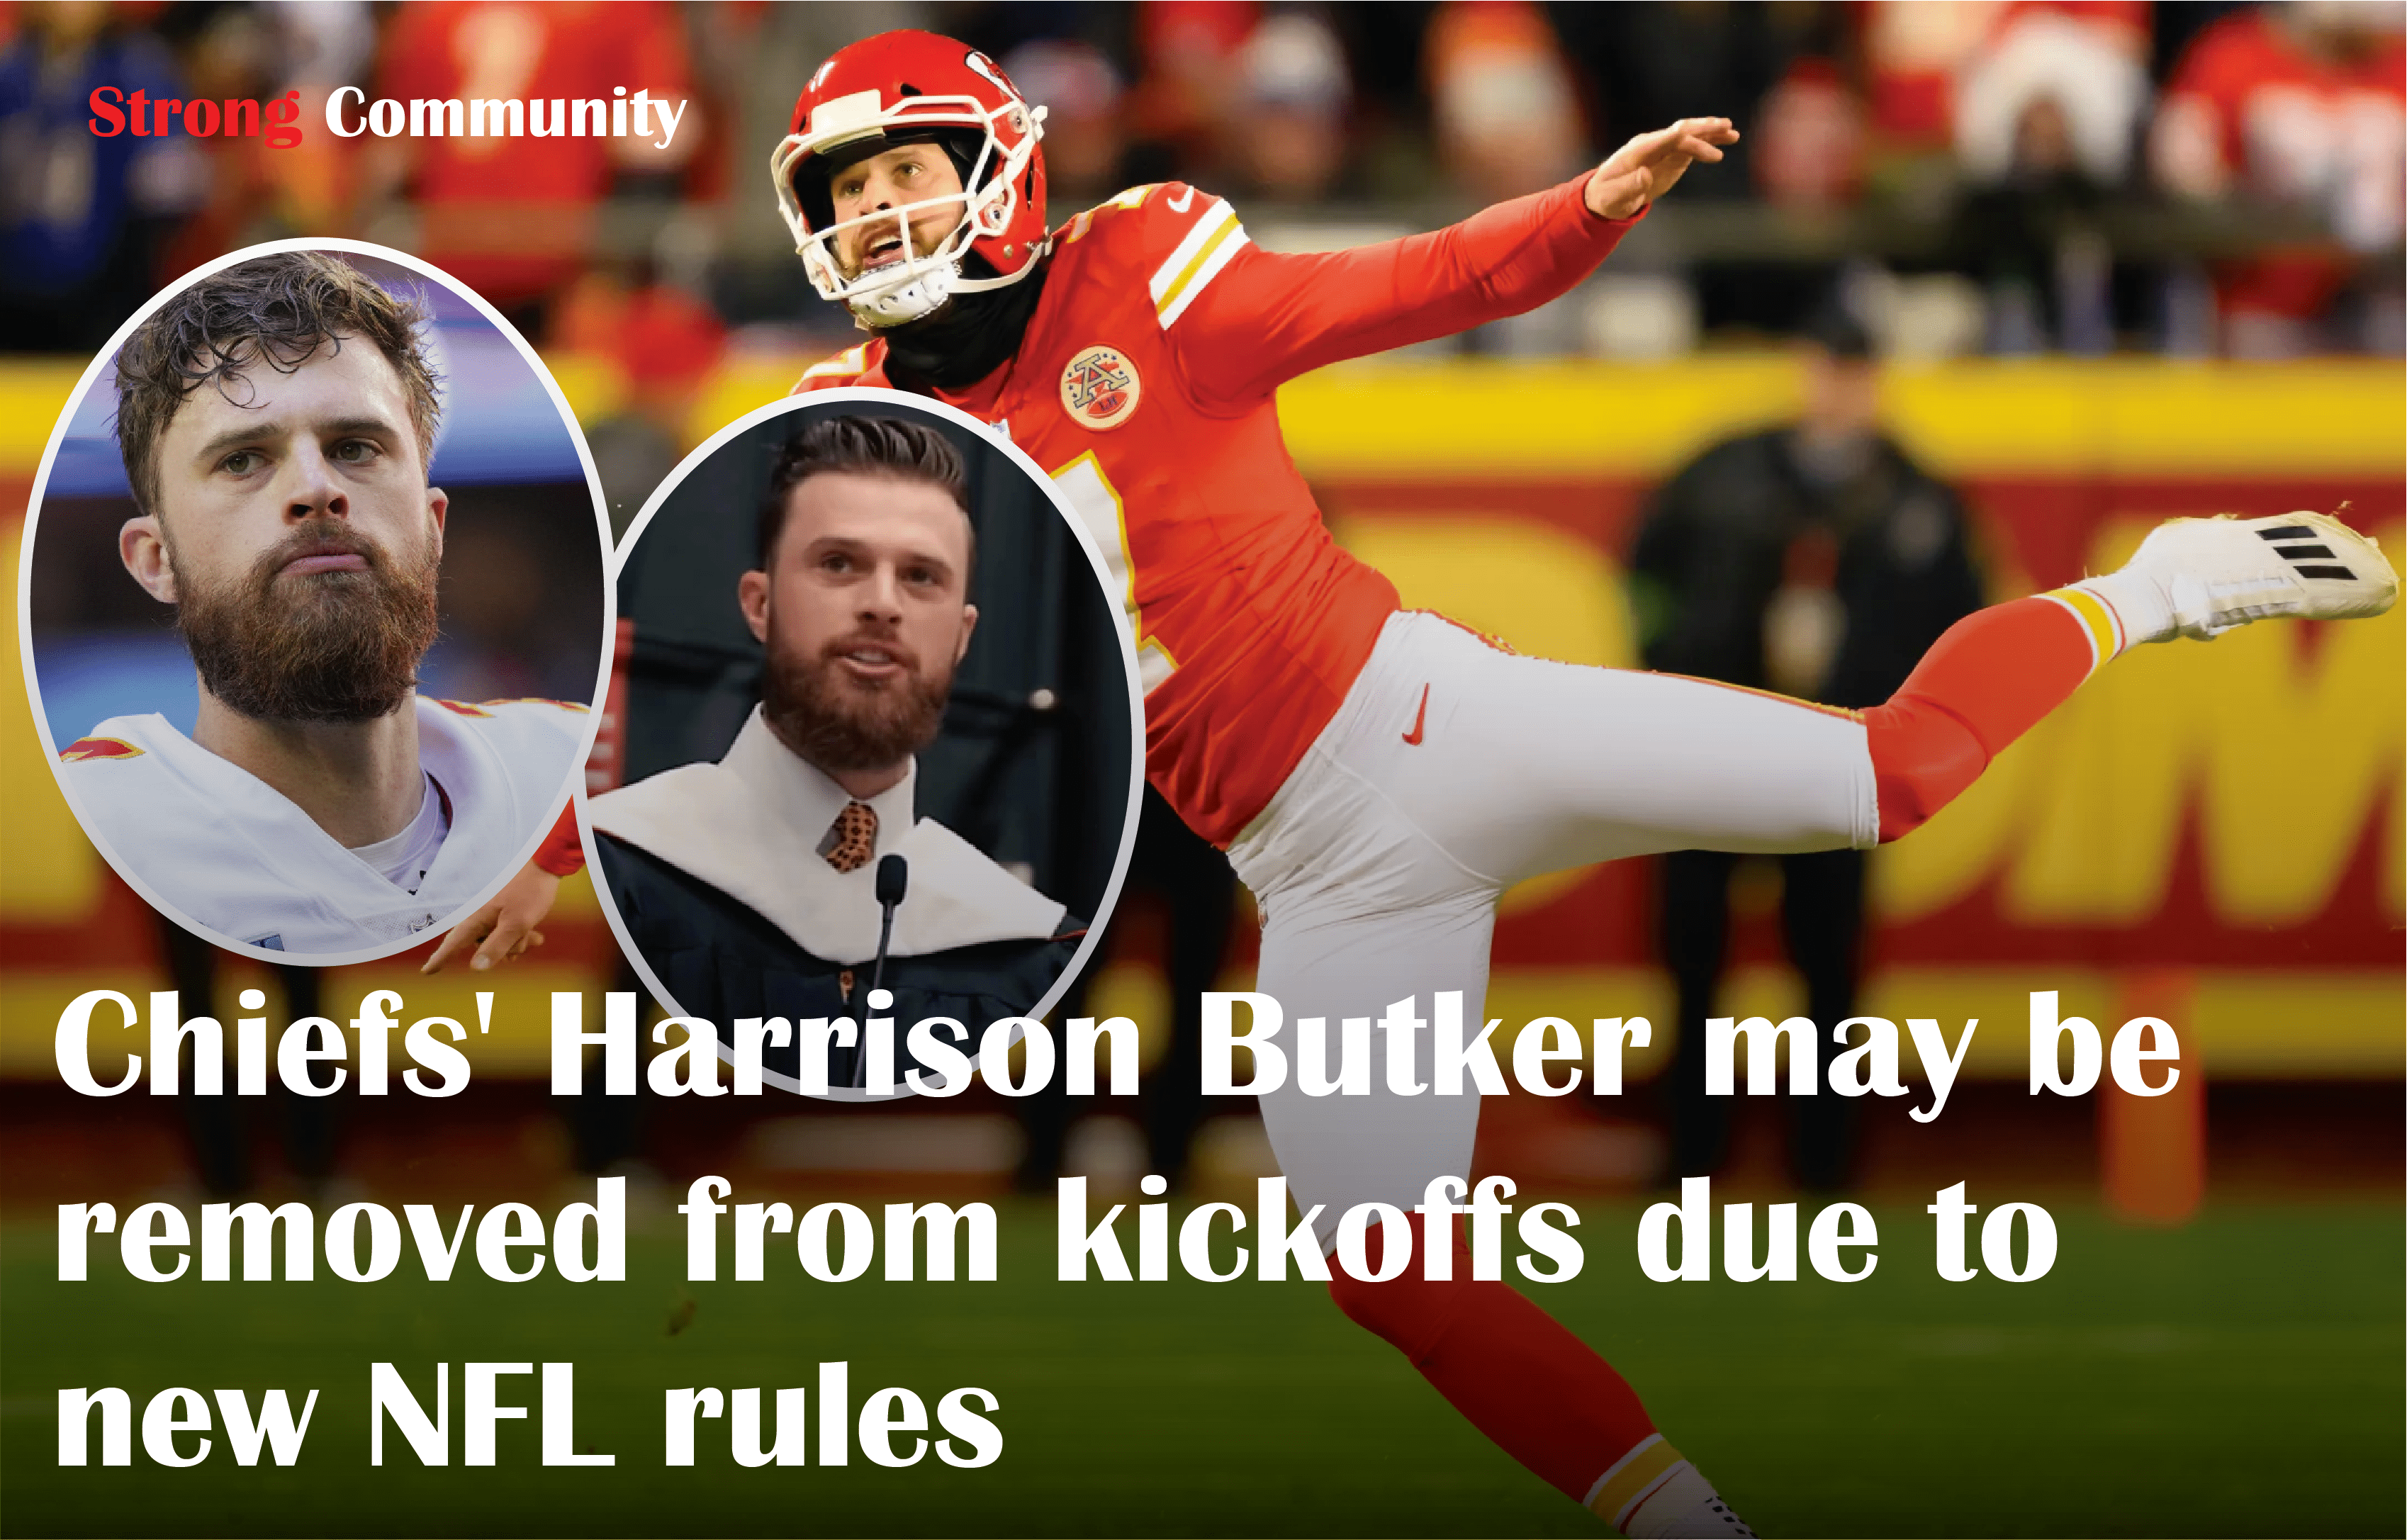 Chiefs’ Harrison Butker may be removed from kickoffs due to new NFL rules